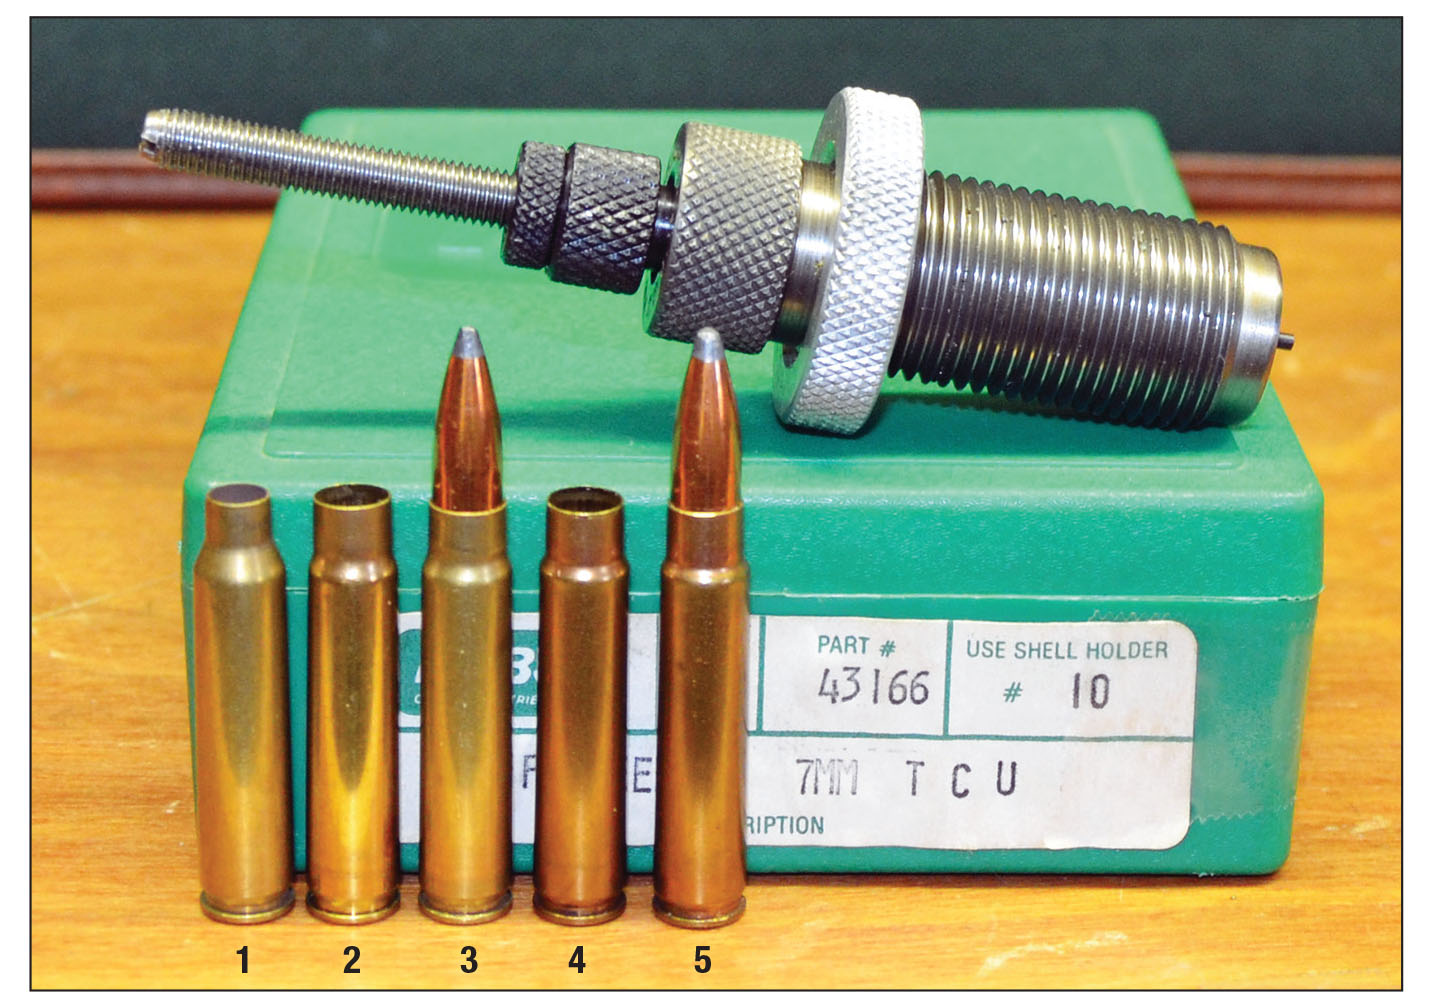 A tapered expander in the RCBS 7mm TCU full-length resizing die increases the neck diameter of the .223 Remington case to 7mm in one step. Cases shown include a (1) .223 Remington case, (2) neck expanded to 7mm, (3) case primed, charged and bullet seated for fireforming, a (4) fireformed case and a (5) loaded 7mm TCU round.